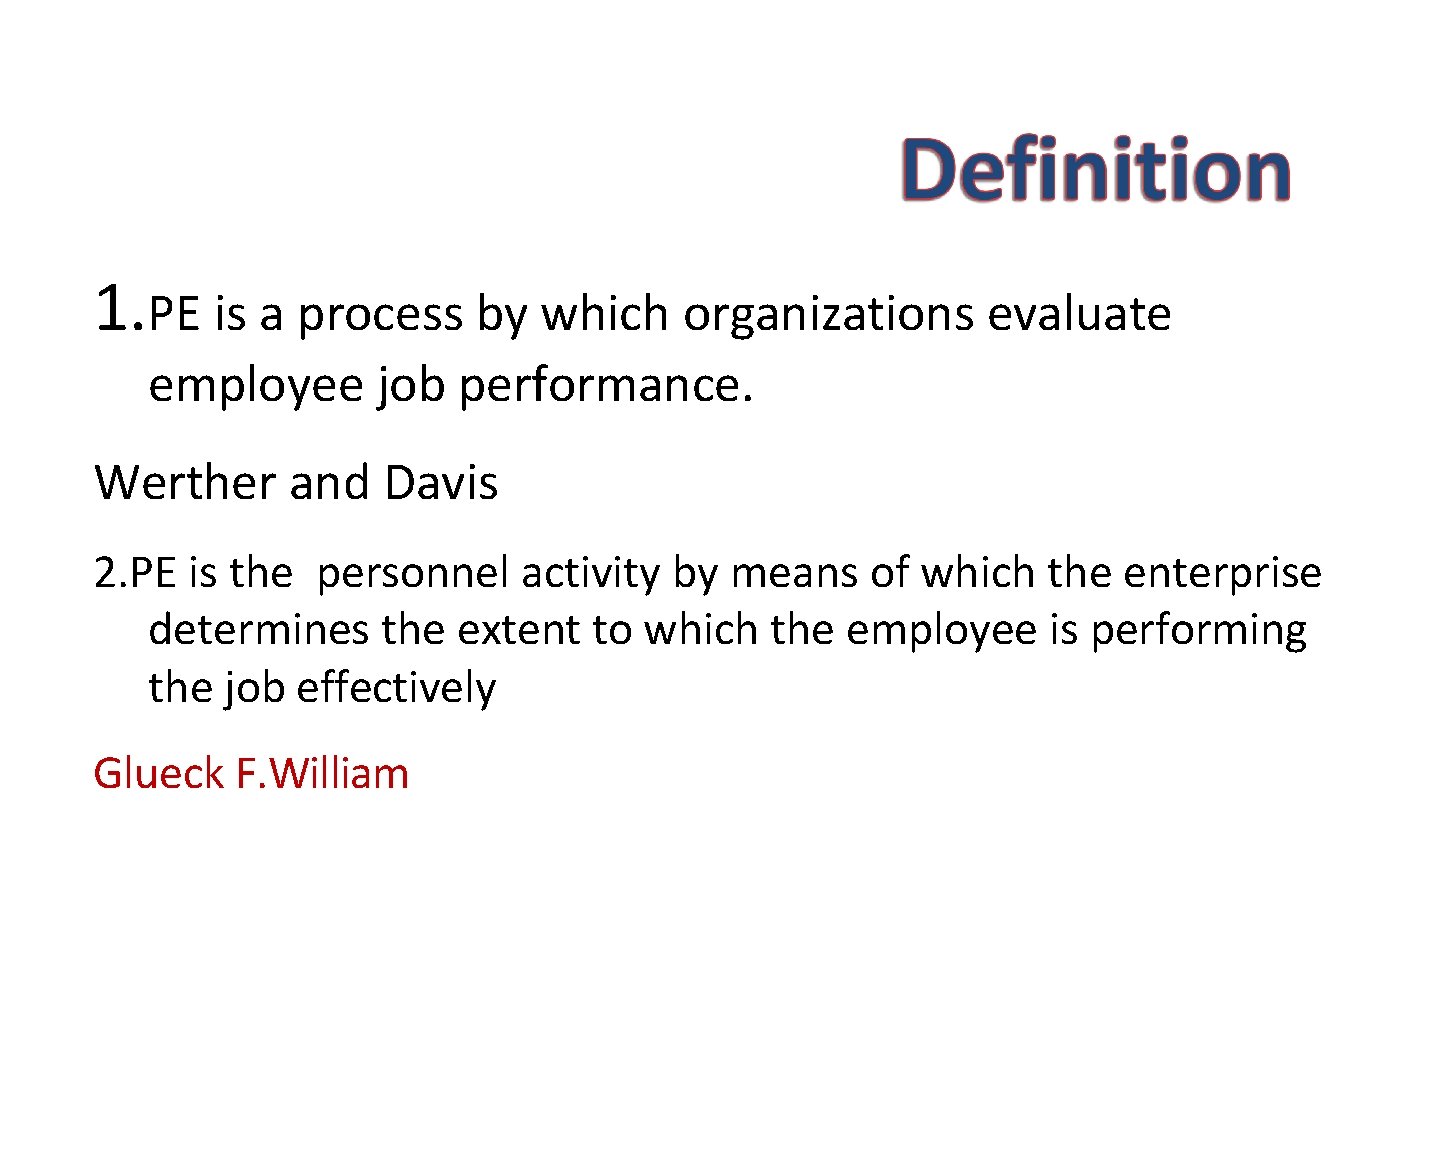 1. PE is a process by which organizations evaluate employee job performance. Werther and